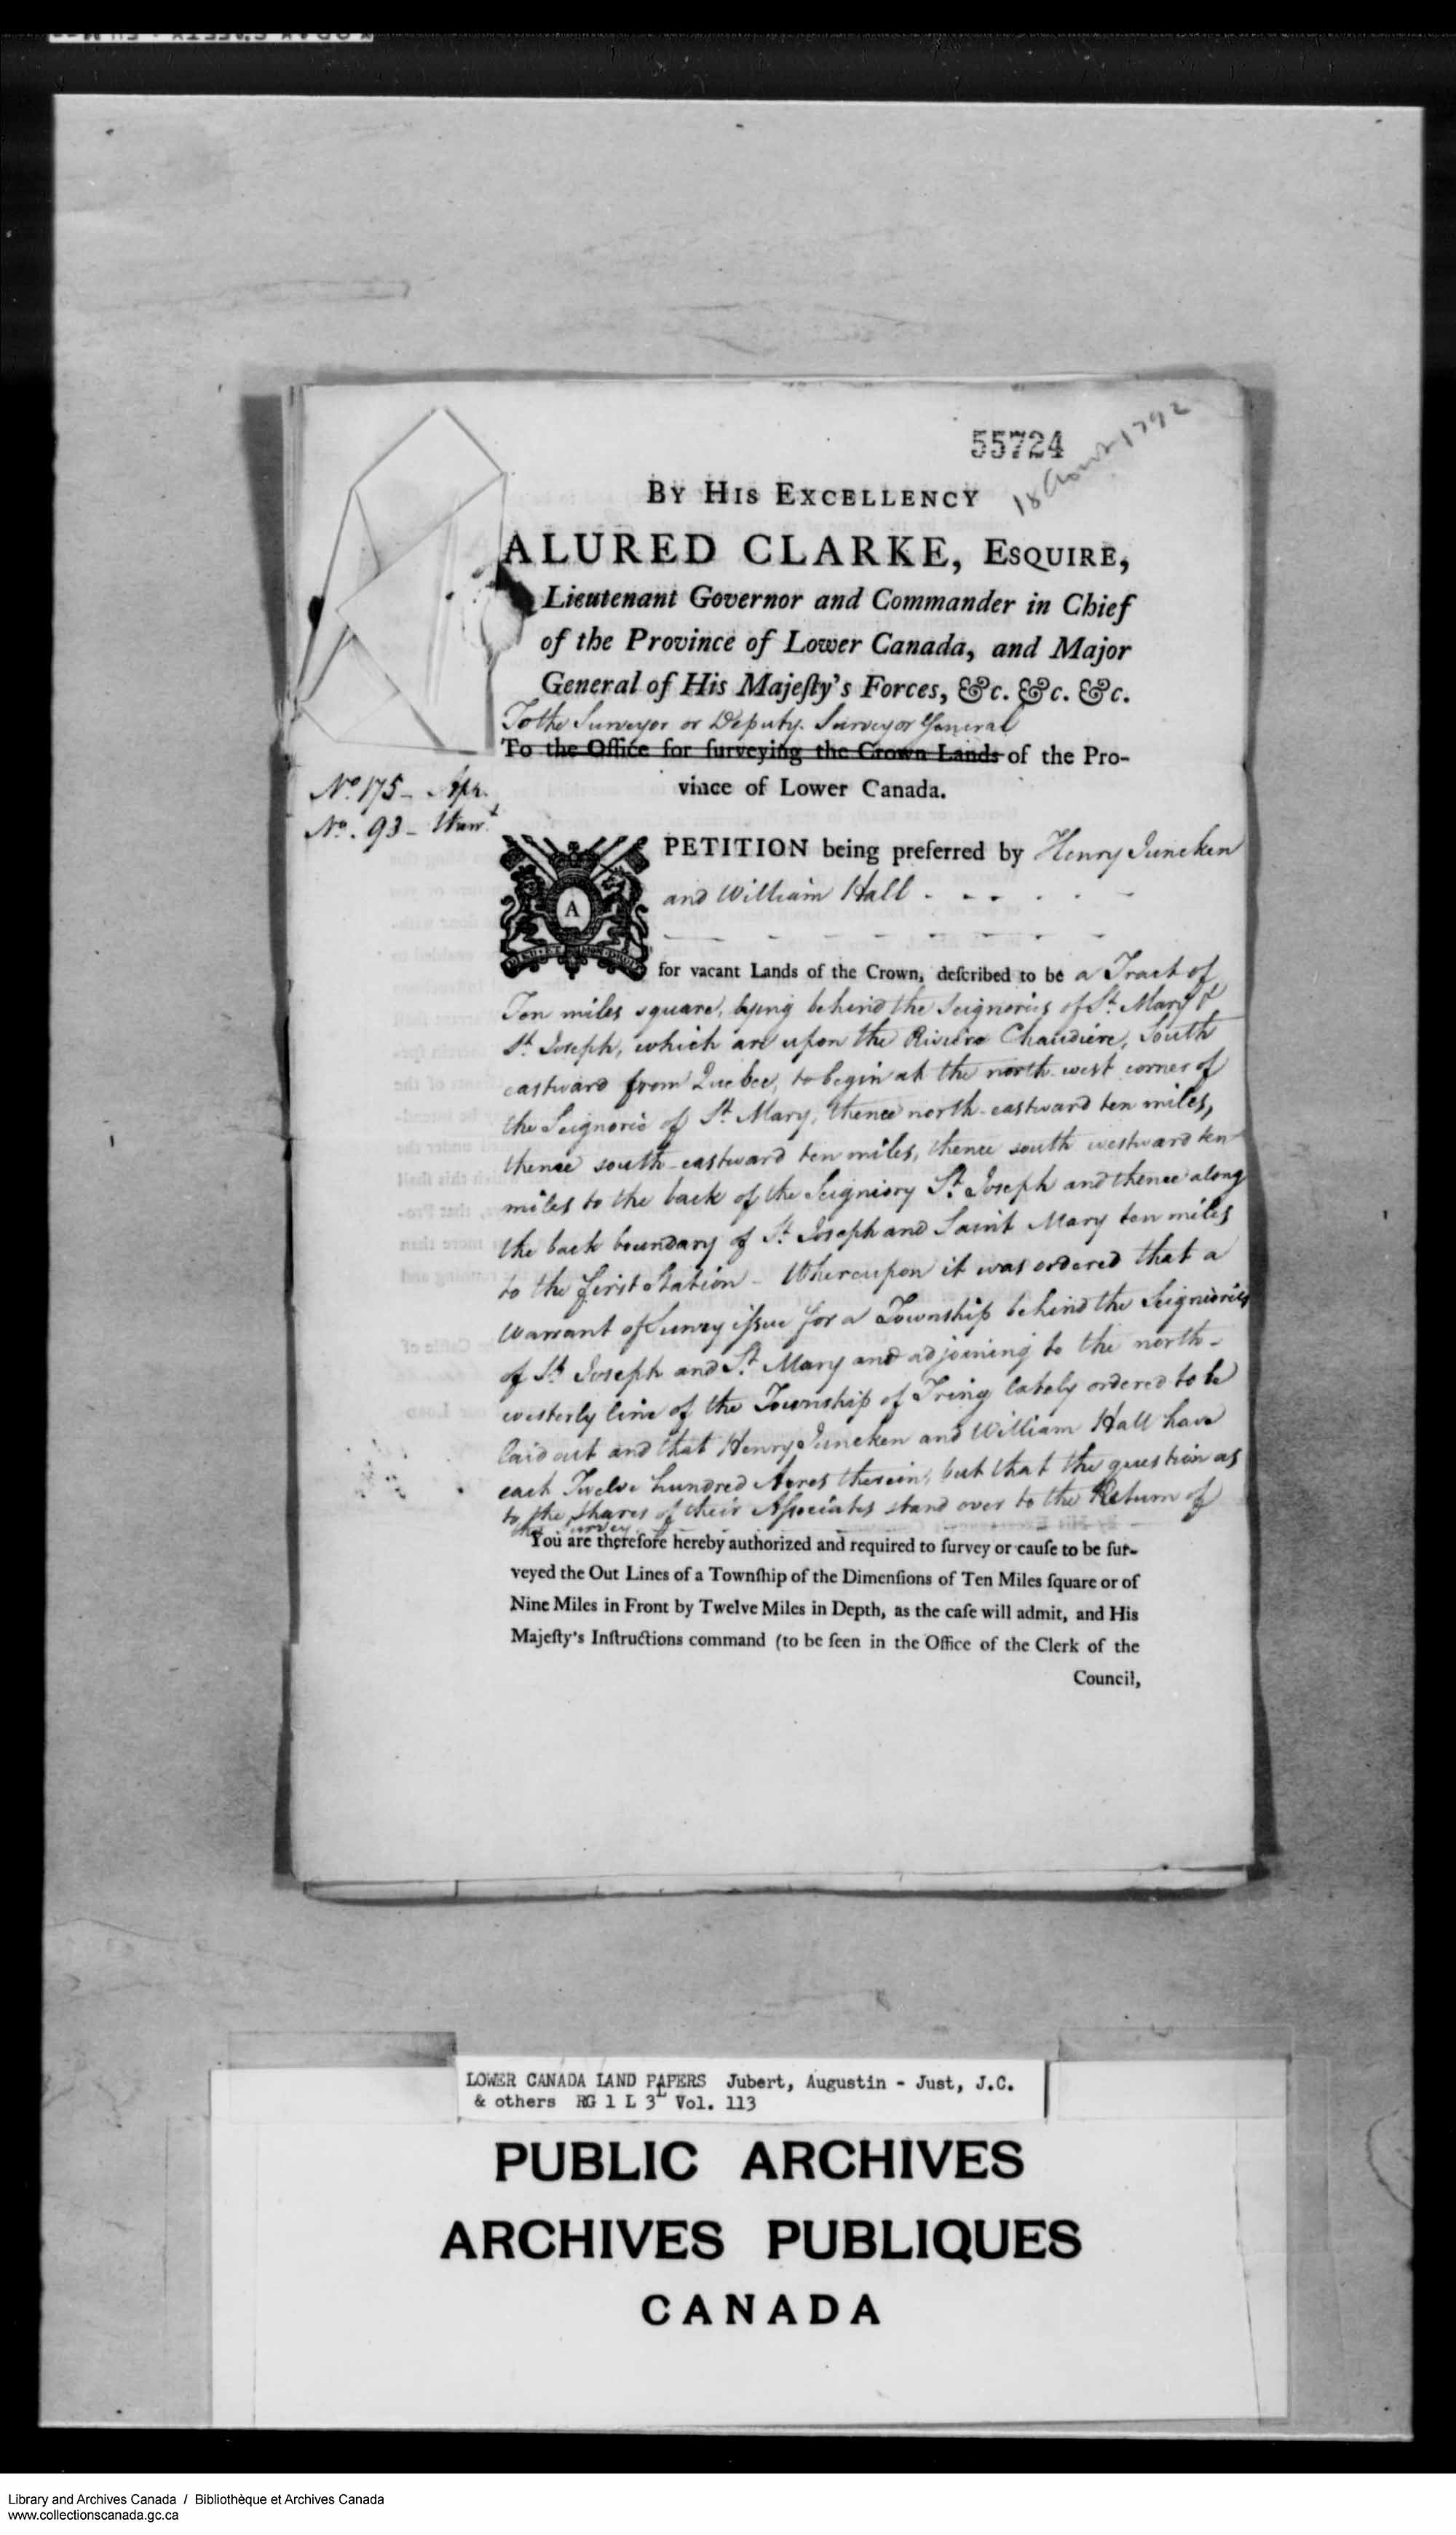 Digitized page of  for Image No.: e008700212